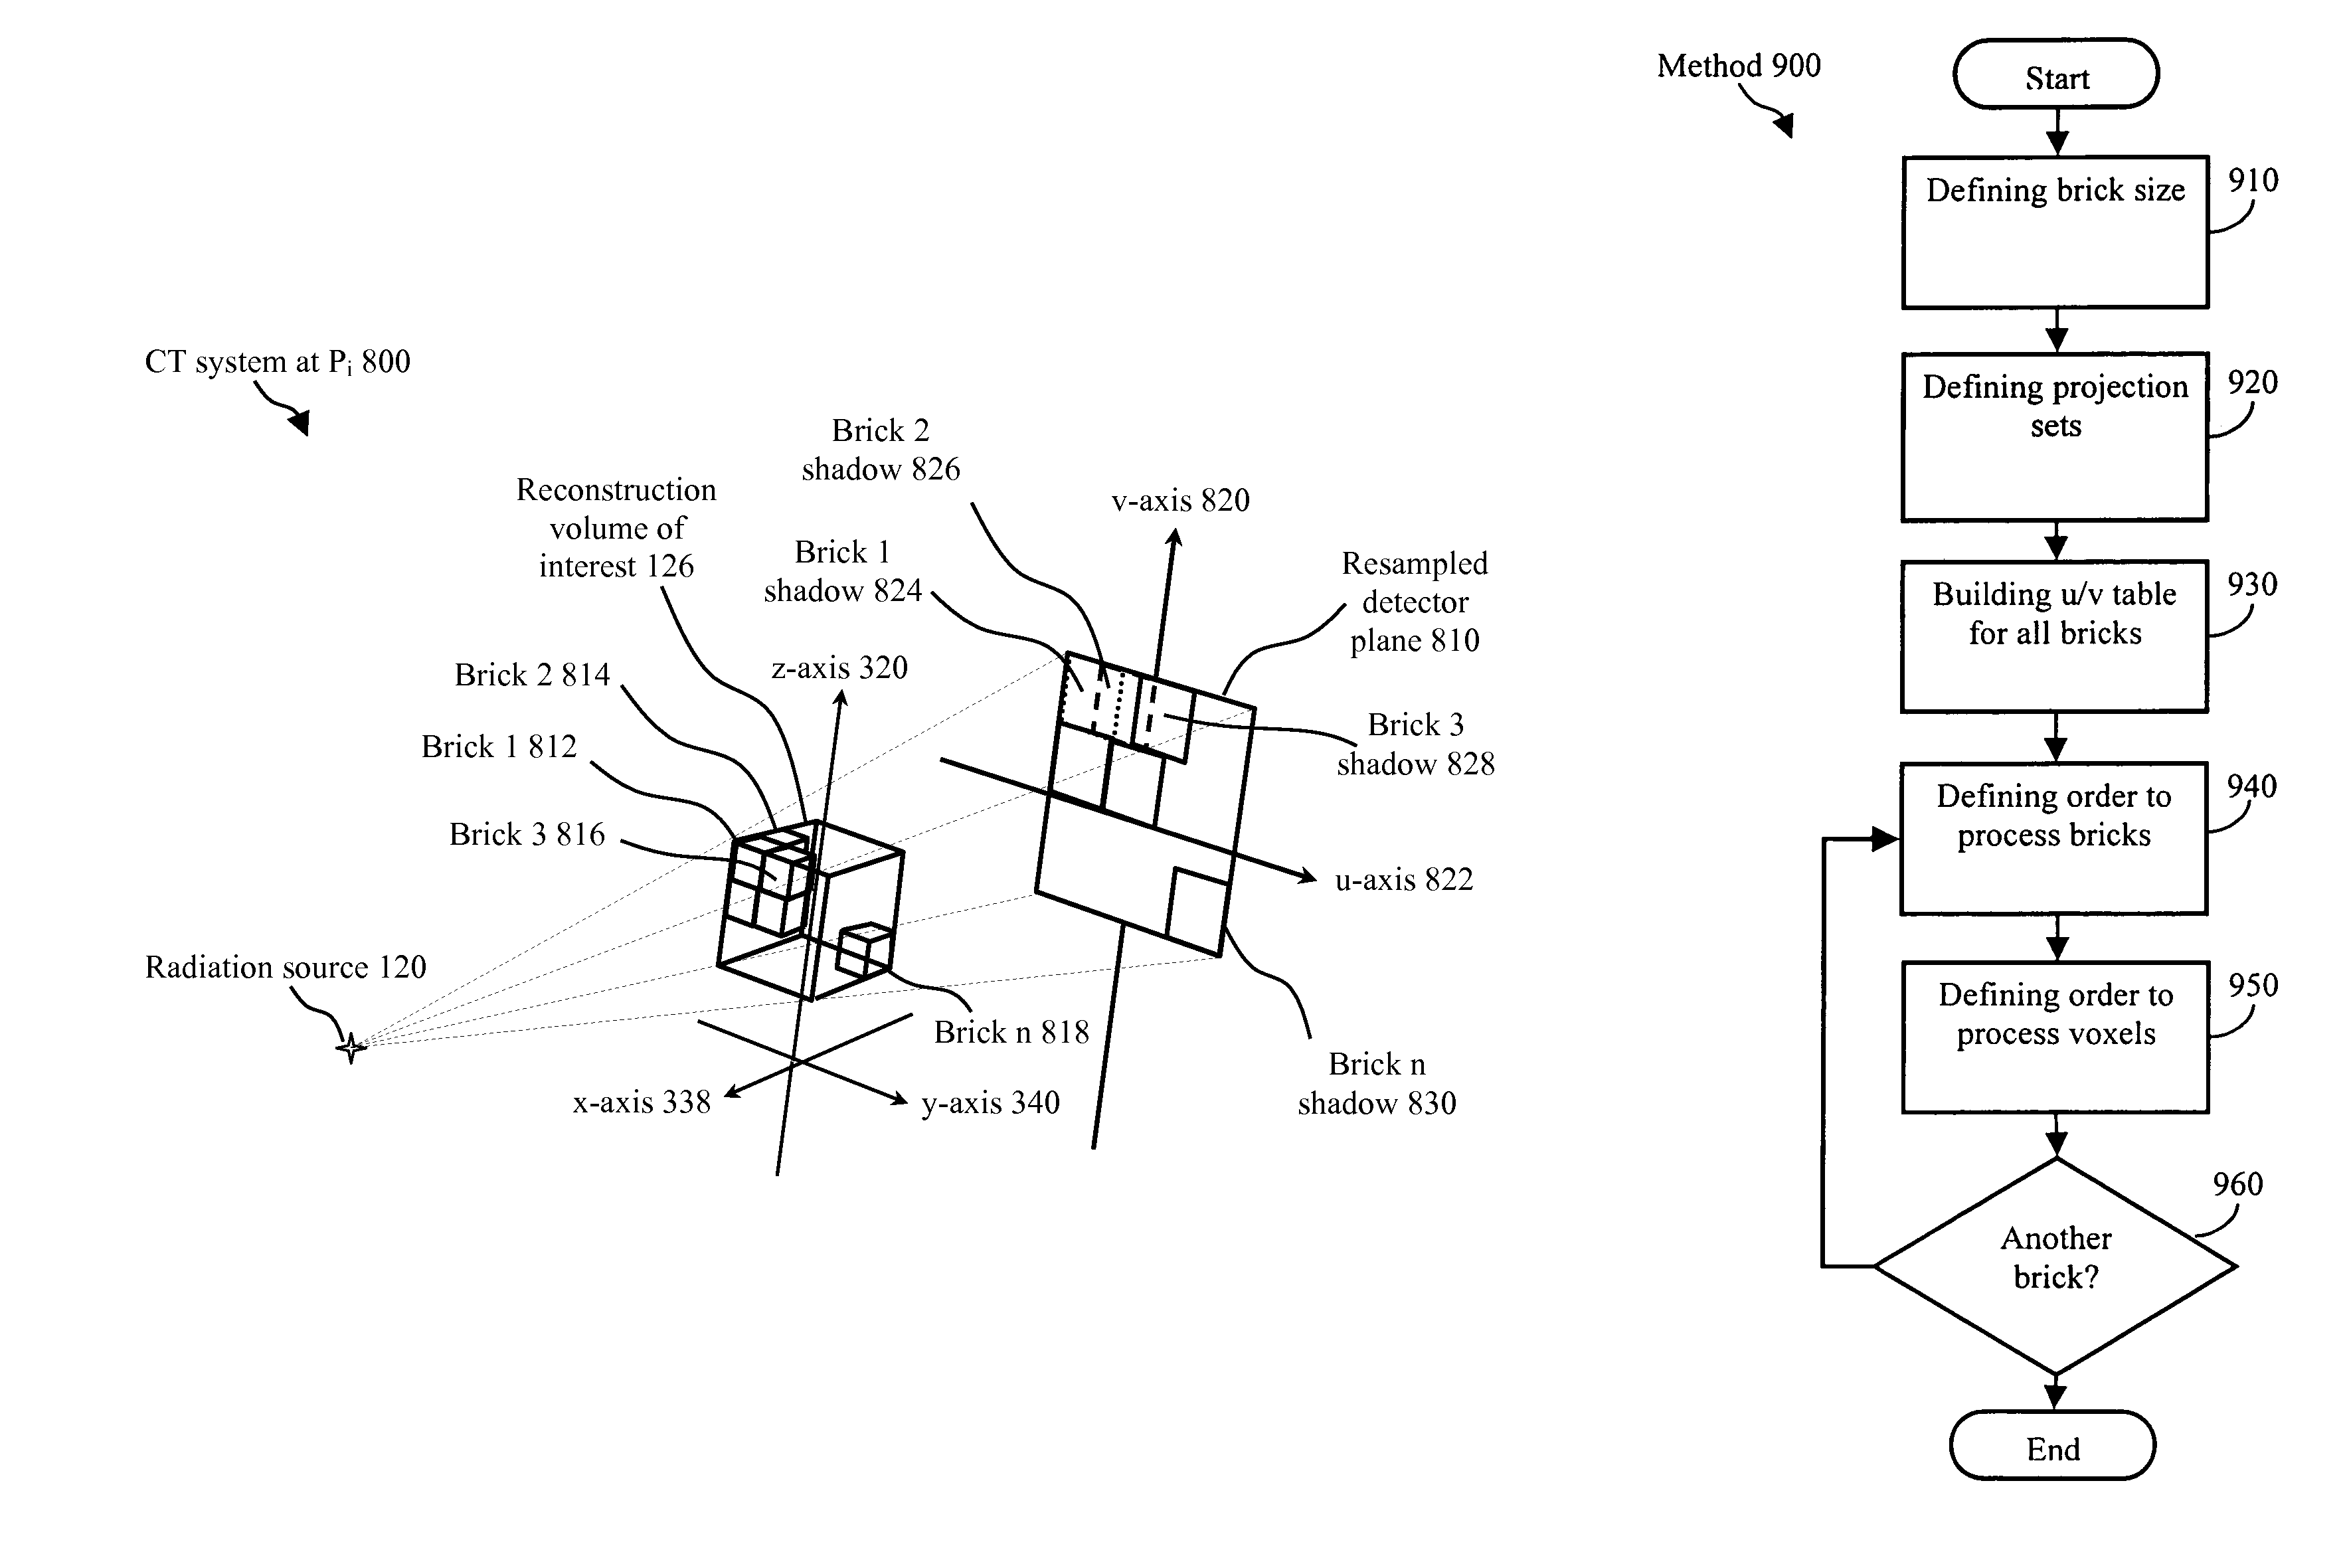 Method of reconstructing computed tomography (CT) volumes suitable for execution on commodity central processing units (CPUs) and graphics processors, and apparatus operating in accord with those methods (rotational X-ray on GPUs)